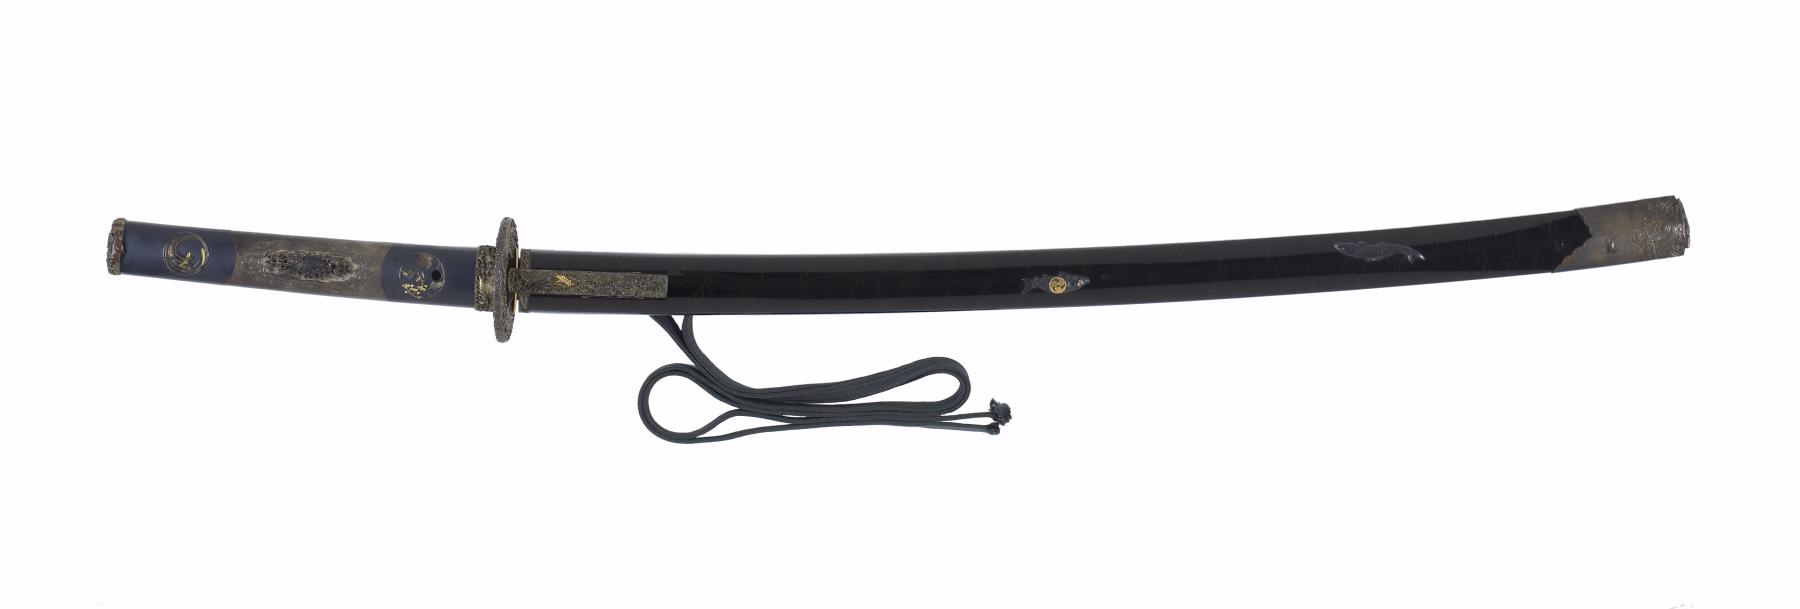 Image for Long sword (katana) with black lacquer saya with raised waves, fish, octopus and mon (includes 51.1264.1-51.1264.3)